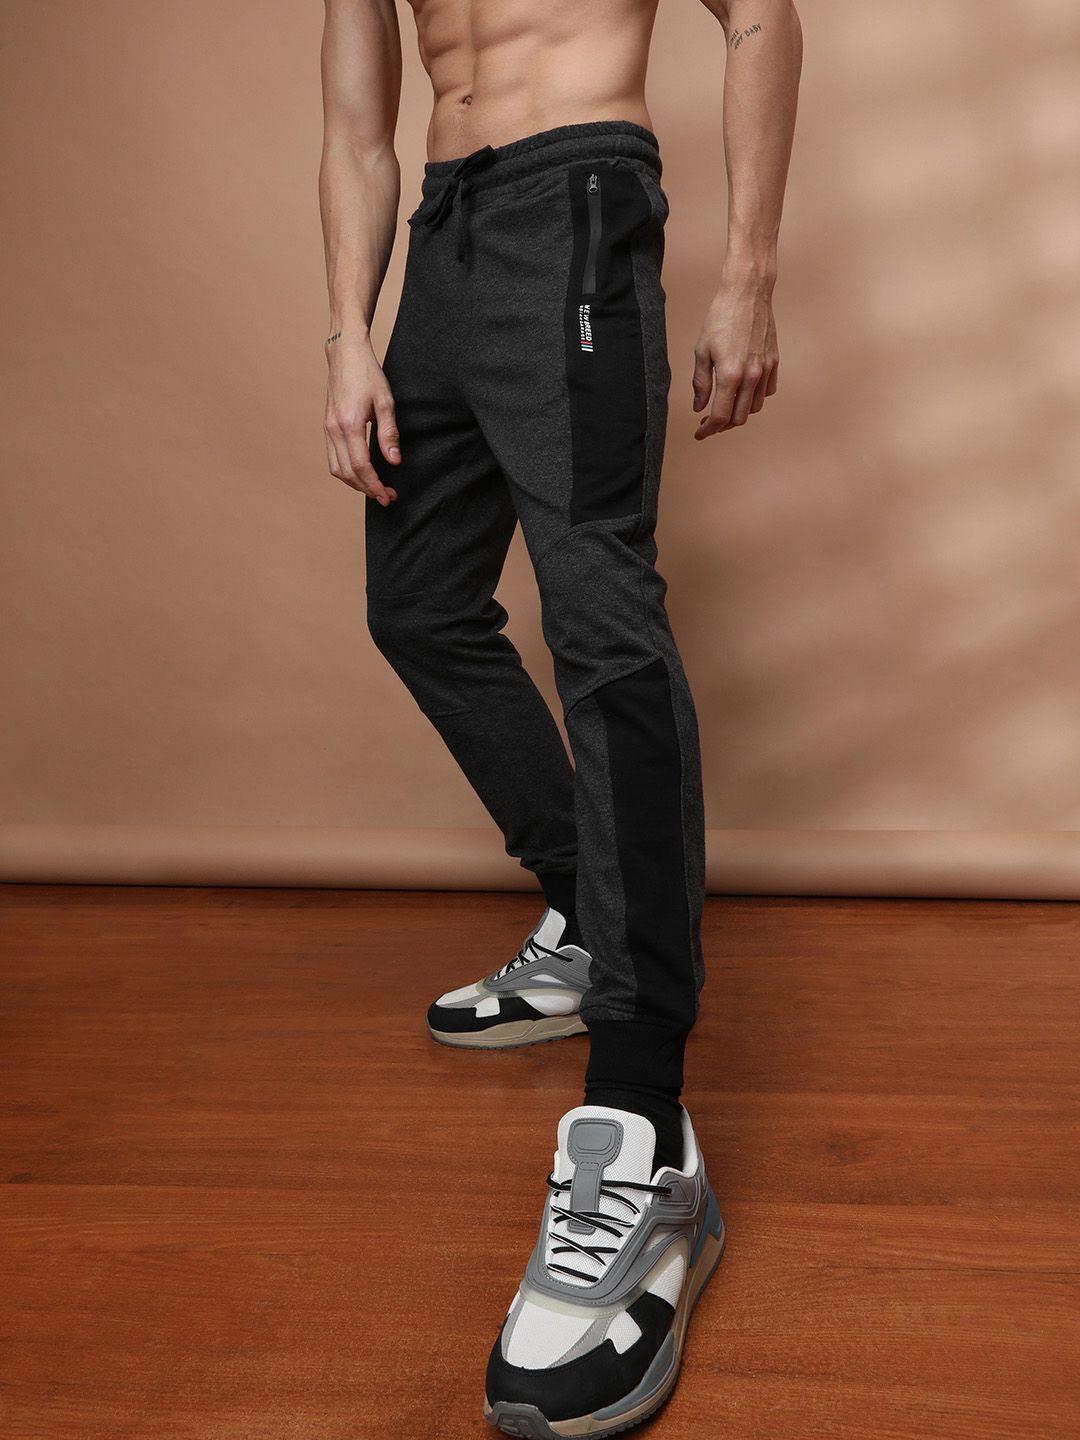 the indian garage co men's charcoal and black colourblocked track pants